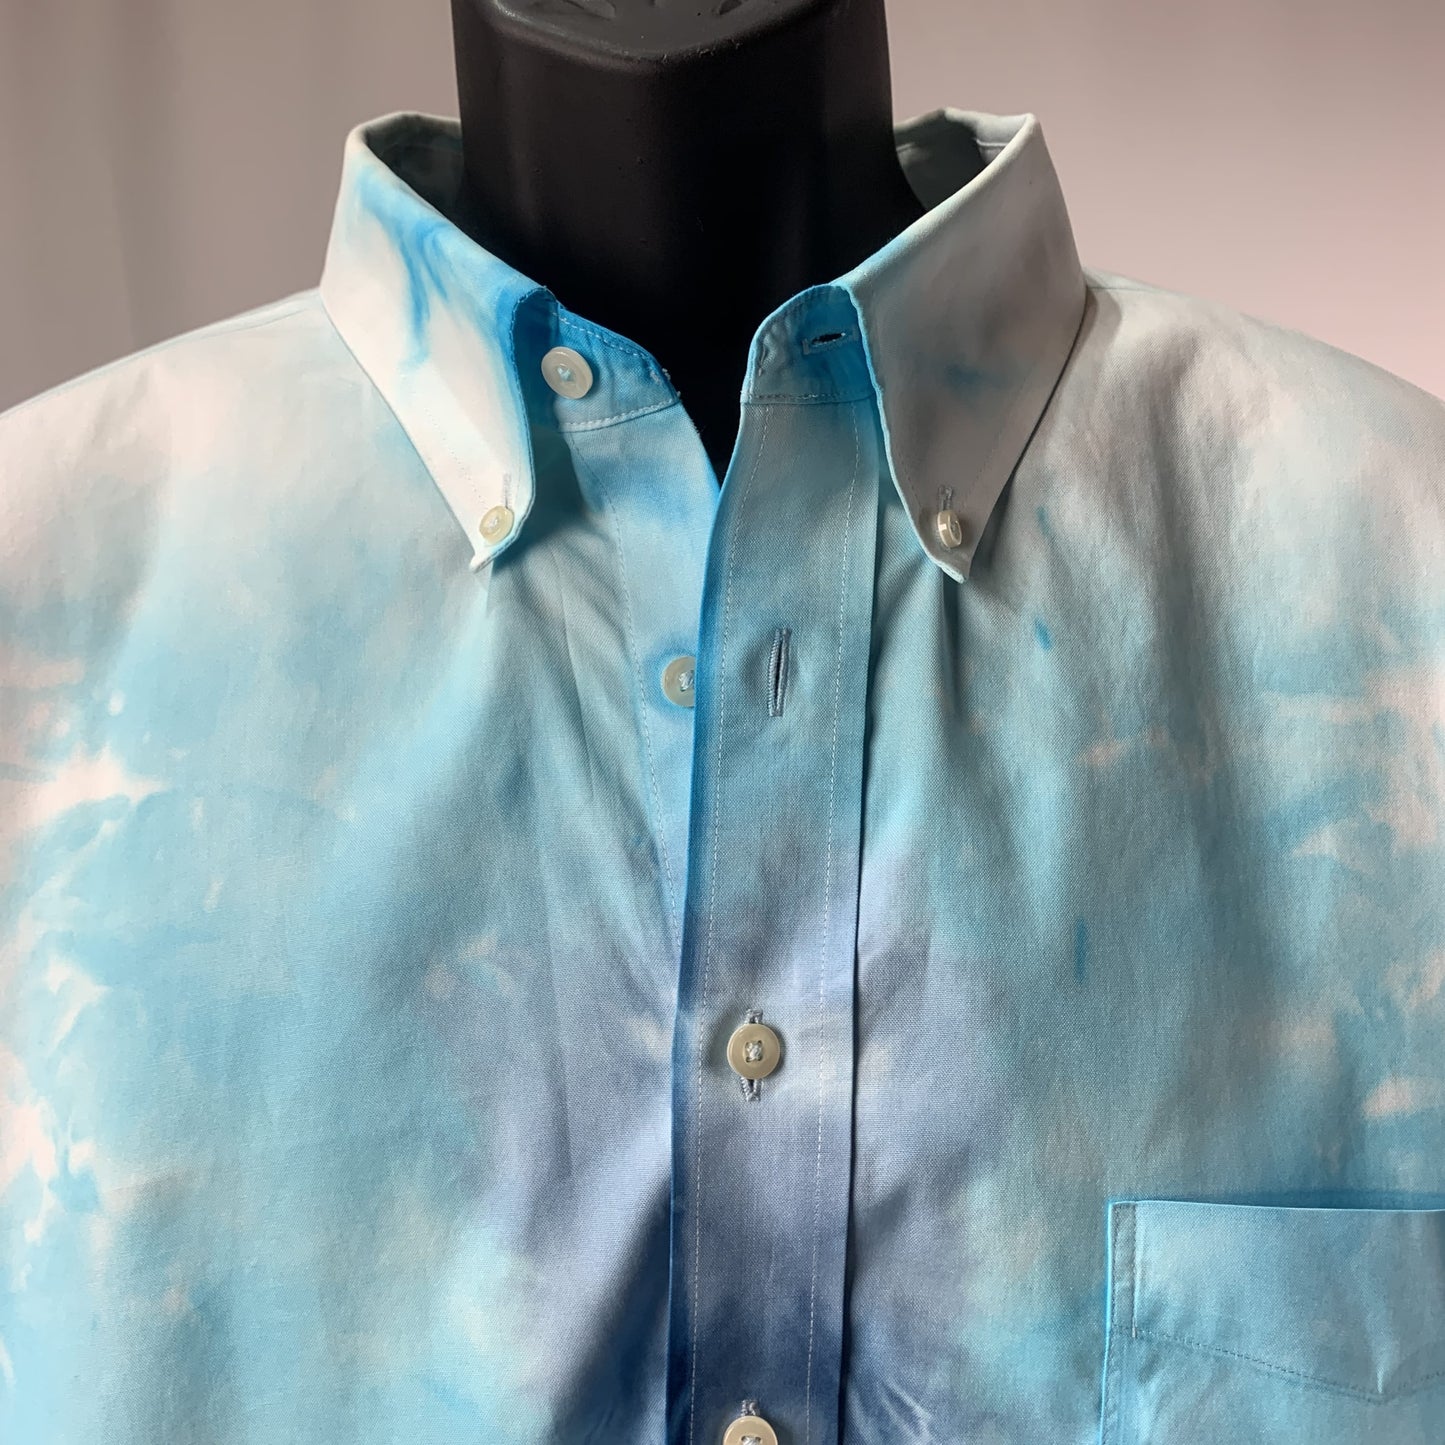 Pastel Lapis and Cerulean Cross | Shirt | 60" chest